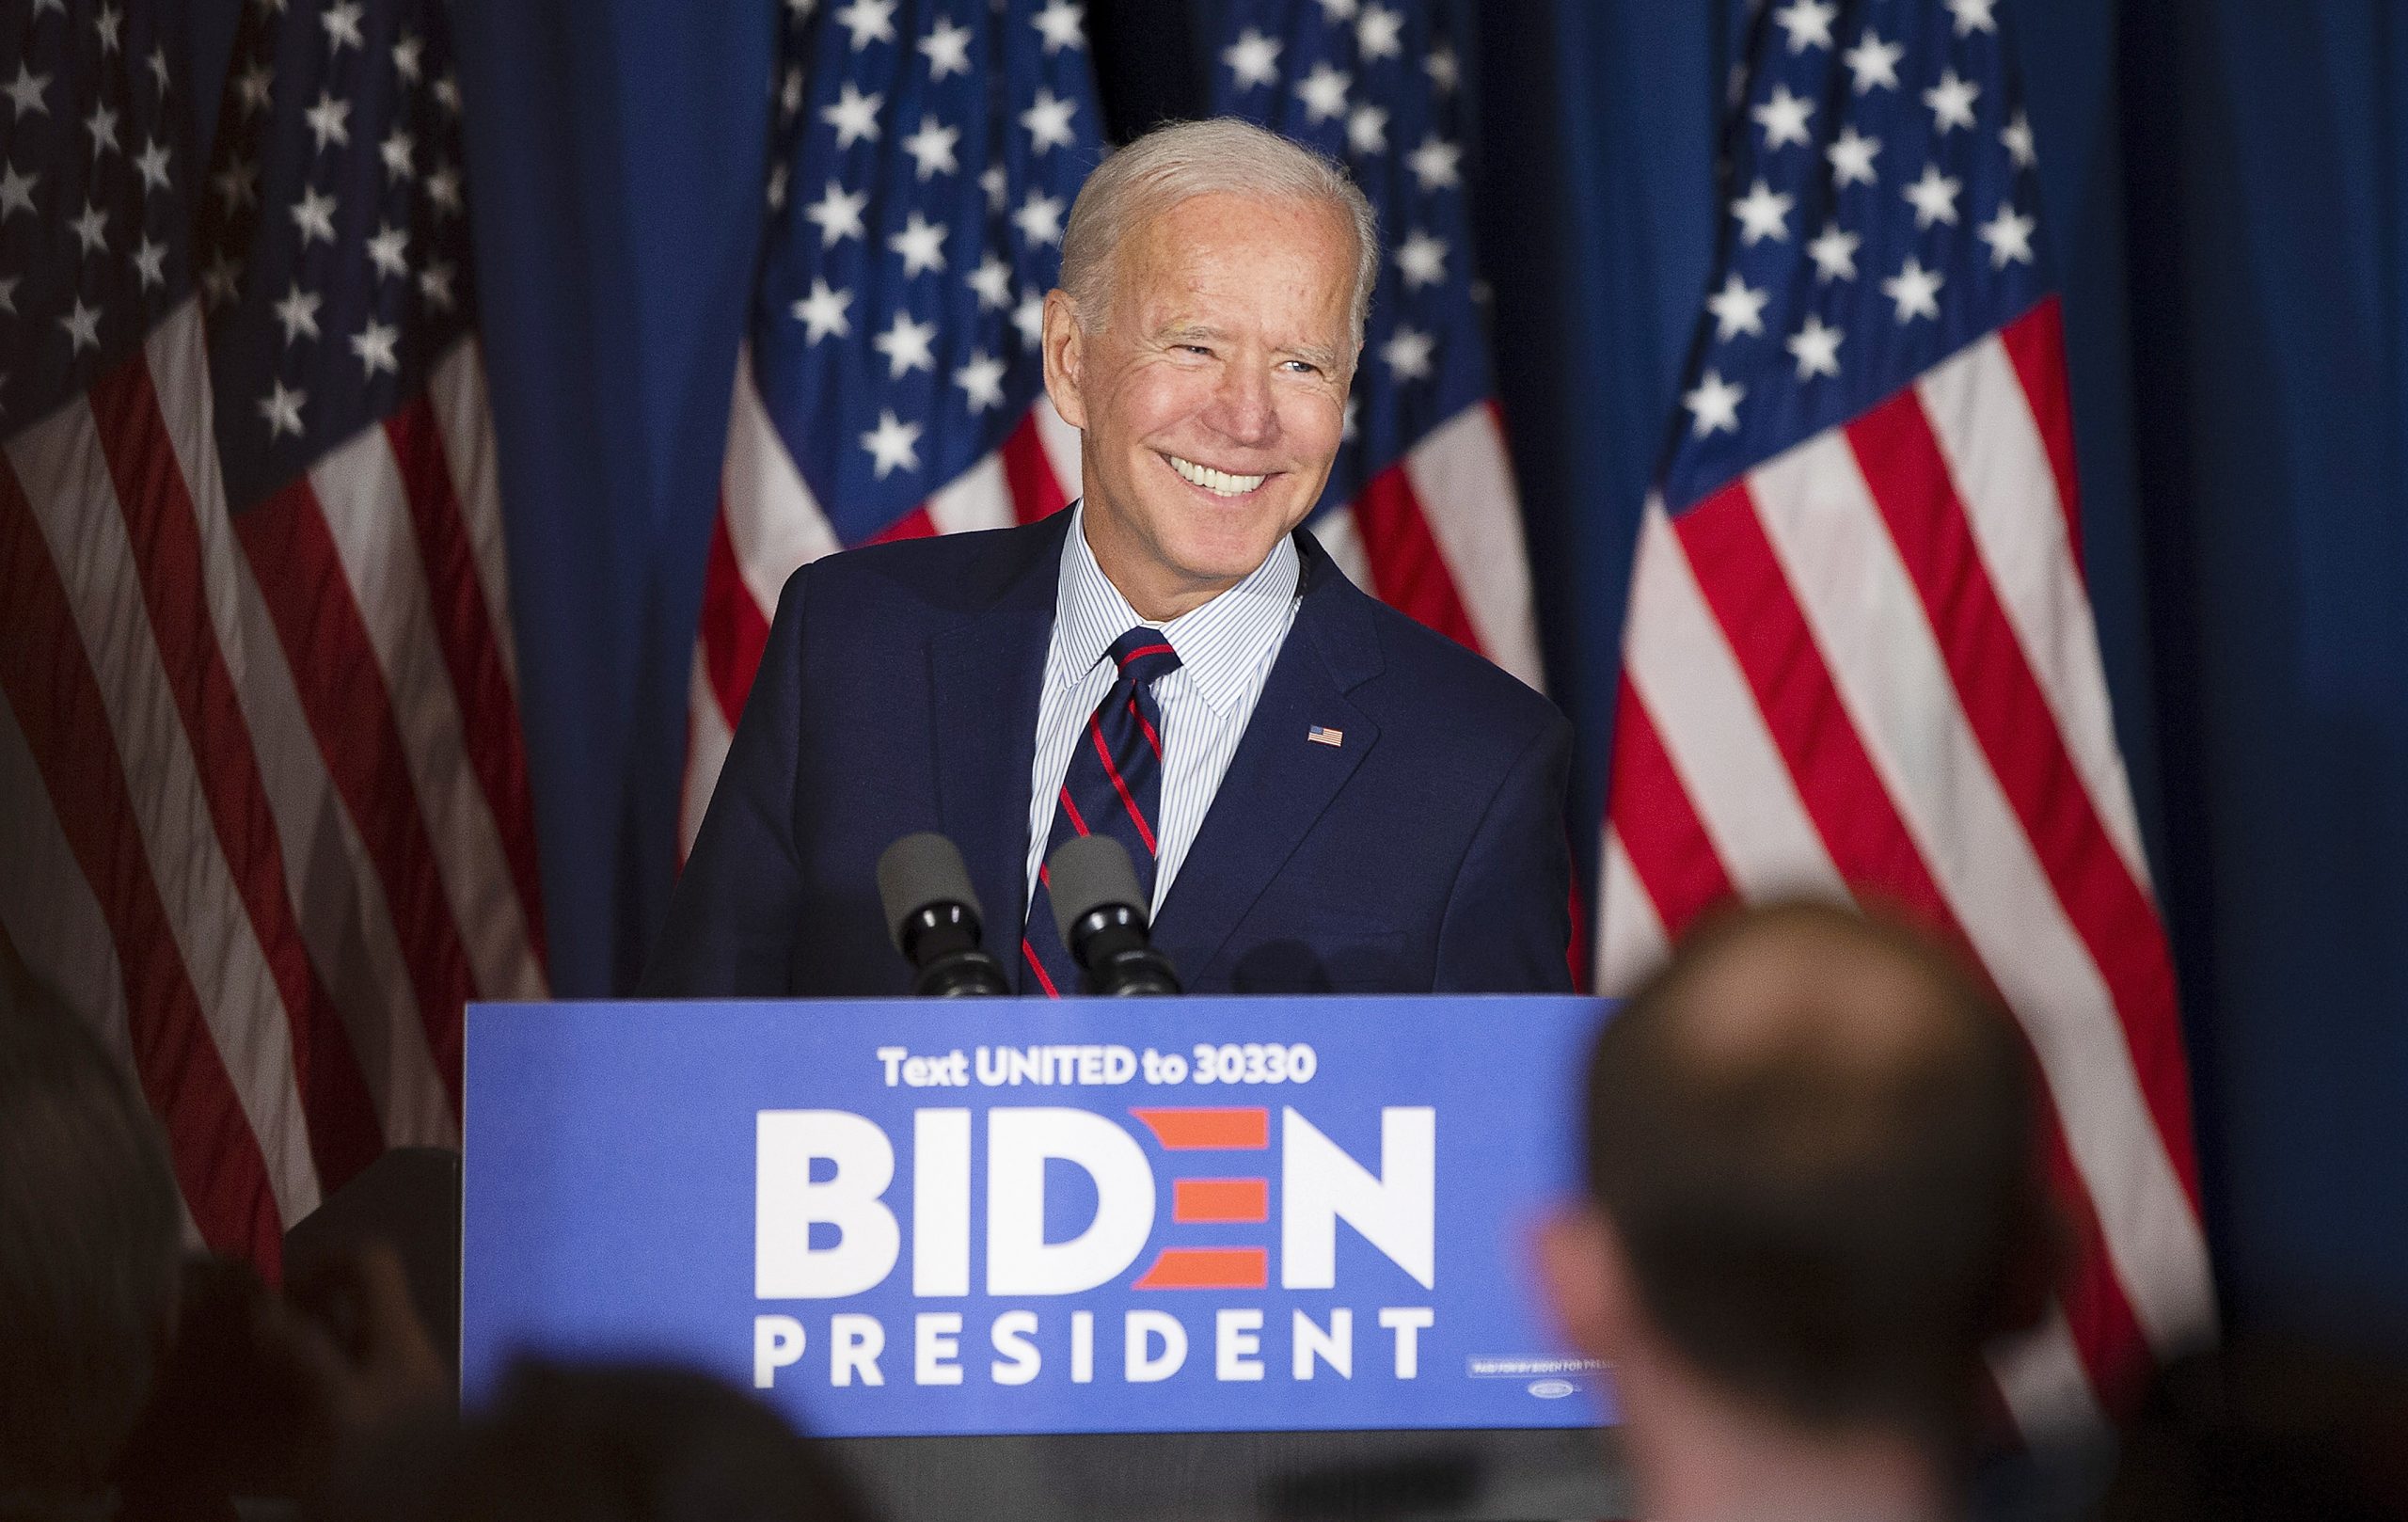 epa08802769 (FILE) - Democratic candidate for United States President, Former Vice President Joe Biden, smiles as he prepares to make a speech during a campaign stop at the Governor's Inn in Rochester, New Hampshire, USA, 09 October 2019 (reissued 06 November 2020). According to media reports citing election officials, Biden has taken the lead in Pennsylvania. An official win of the state would push Biden over the 270 electoral votes necessary to become the 46th President of the United States. *** Local Caption *** 55537332  EPA/CJ GUNTHER *** Local Caption *** 55537332